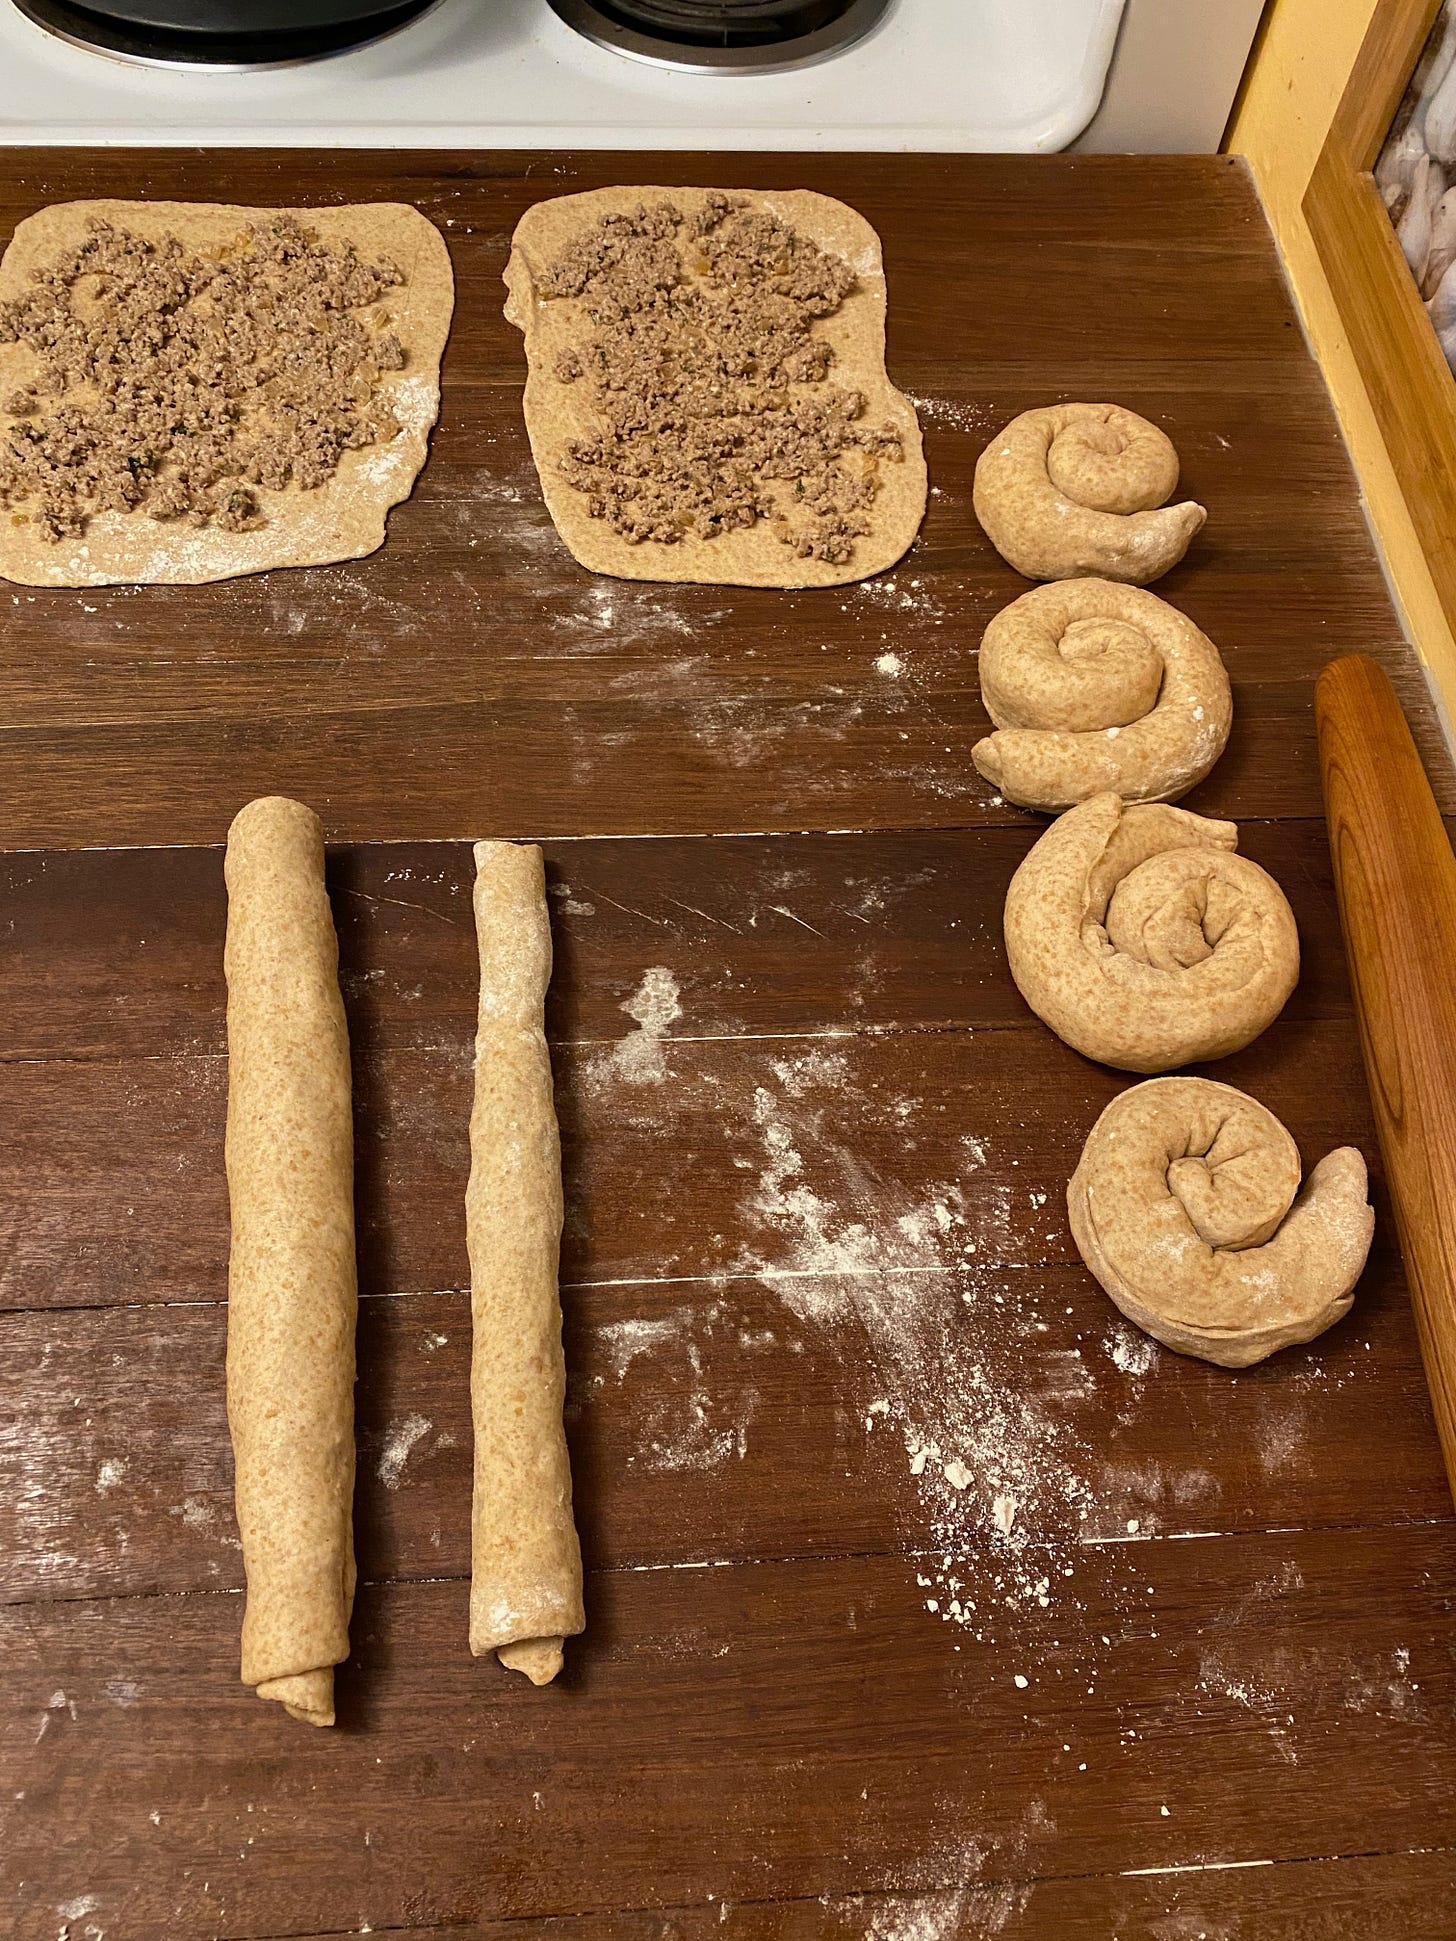 Flatbreads in various stages on a kitchen counter: two open rectangles spread with filling, two long ropes of rolled up dough, and four spiral coils.